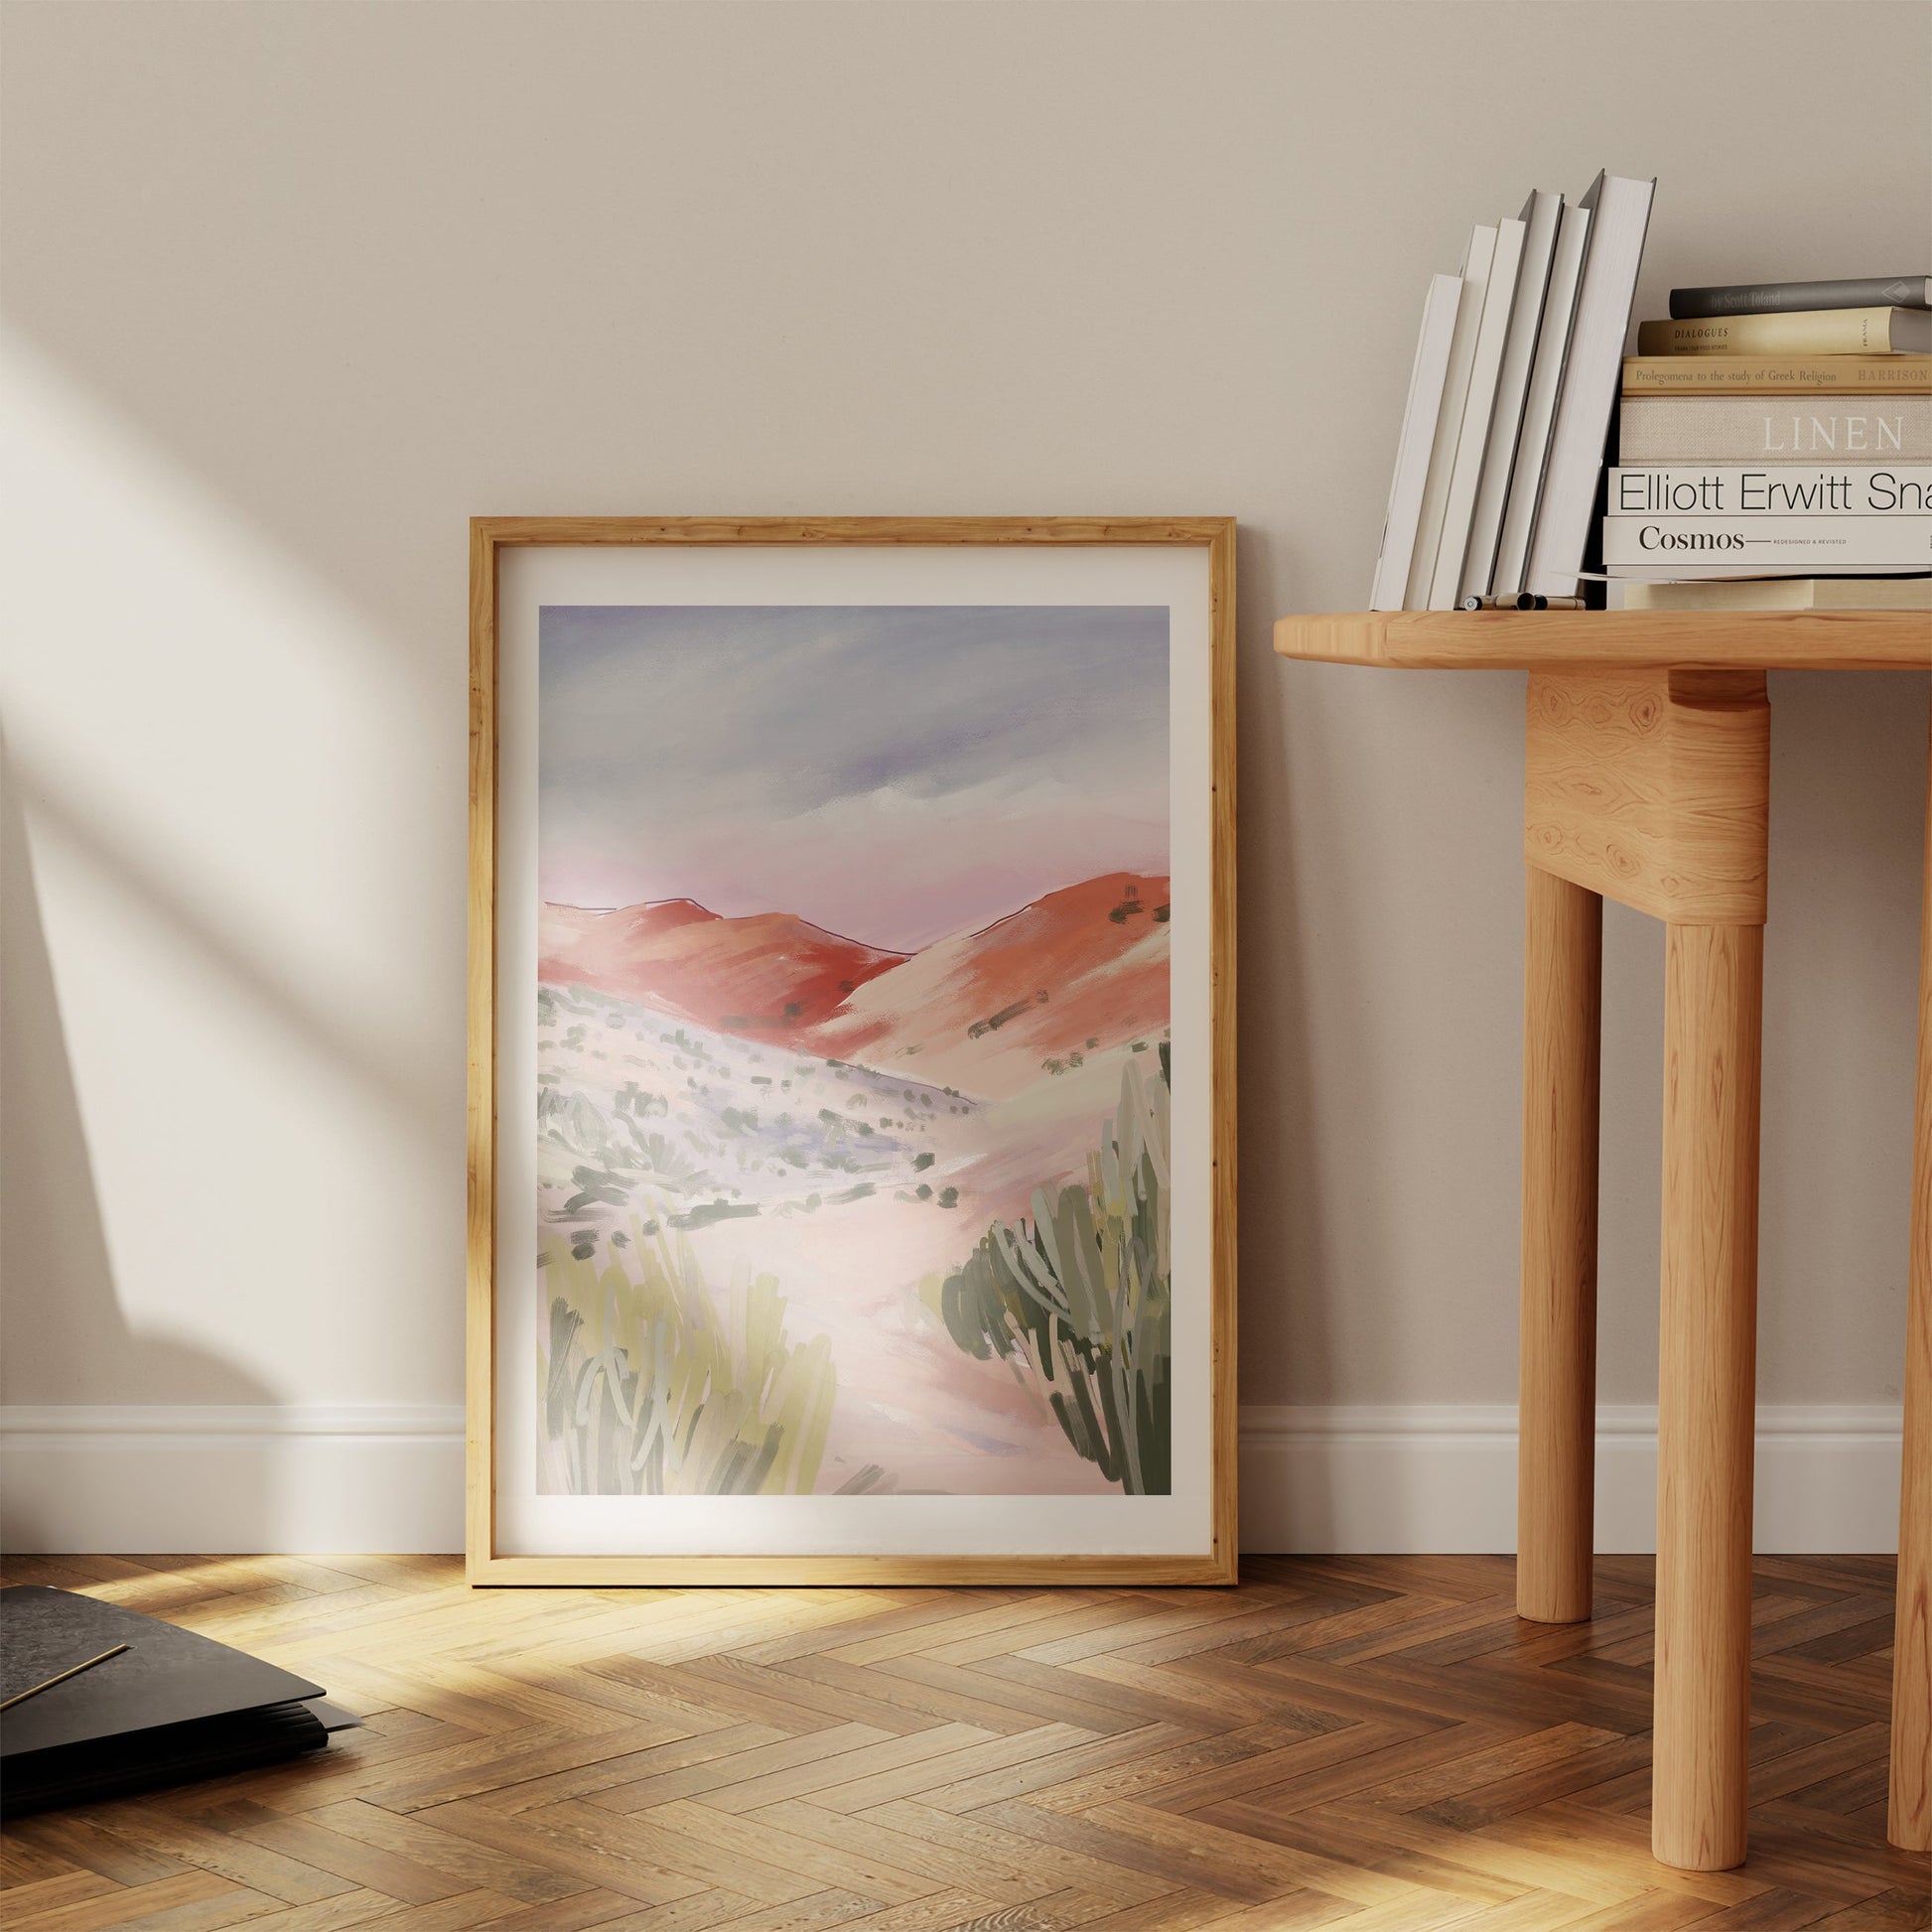 a picture of a desert landscape in a wooden frame